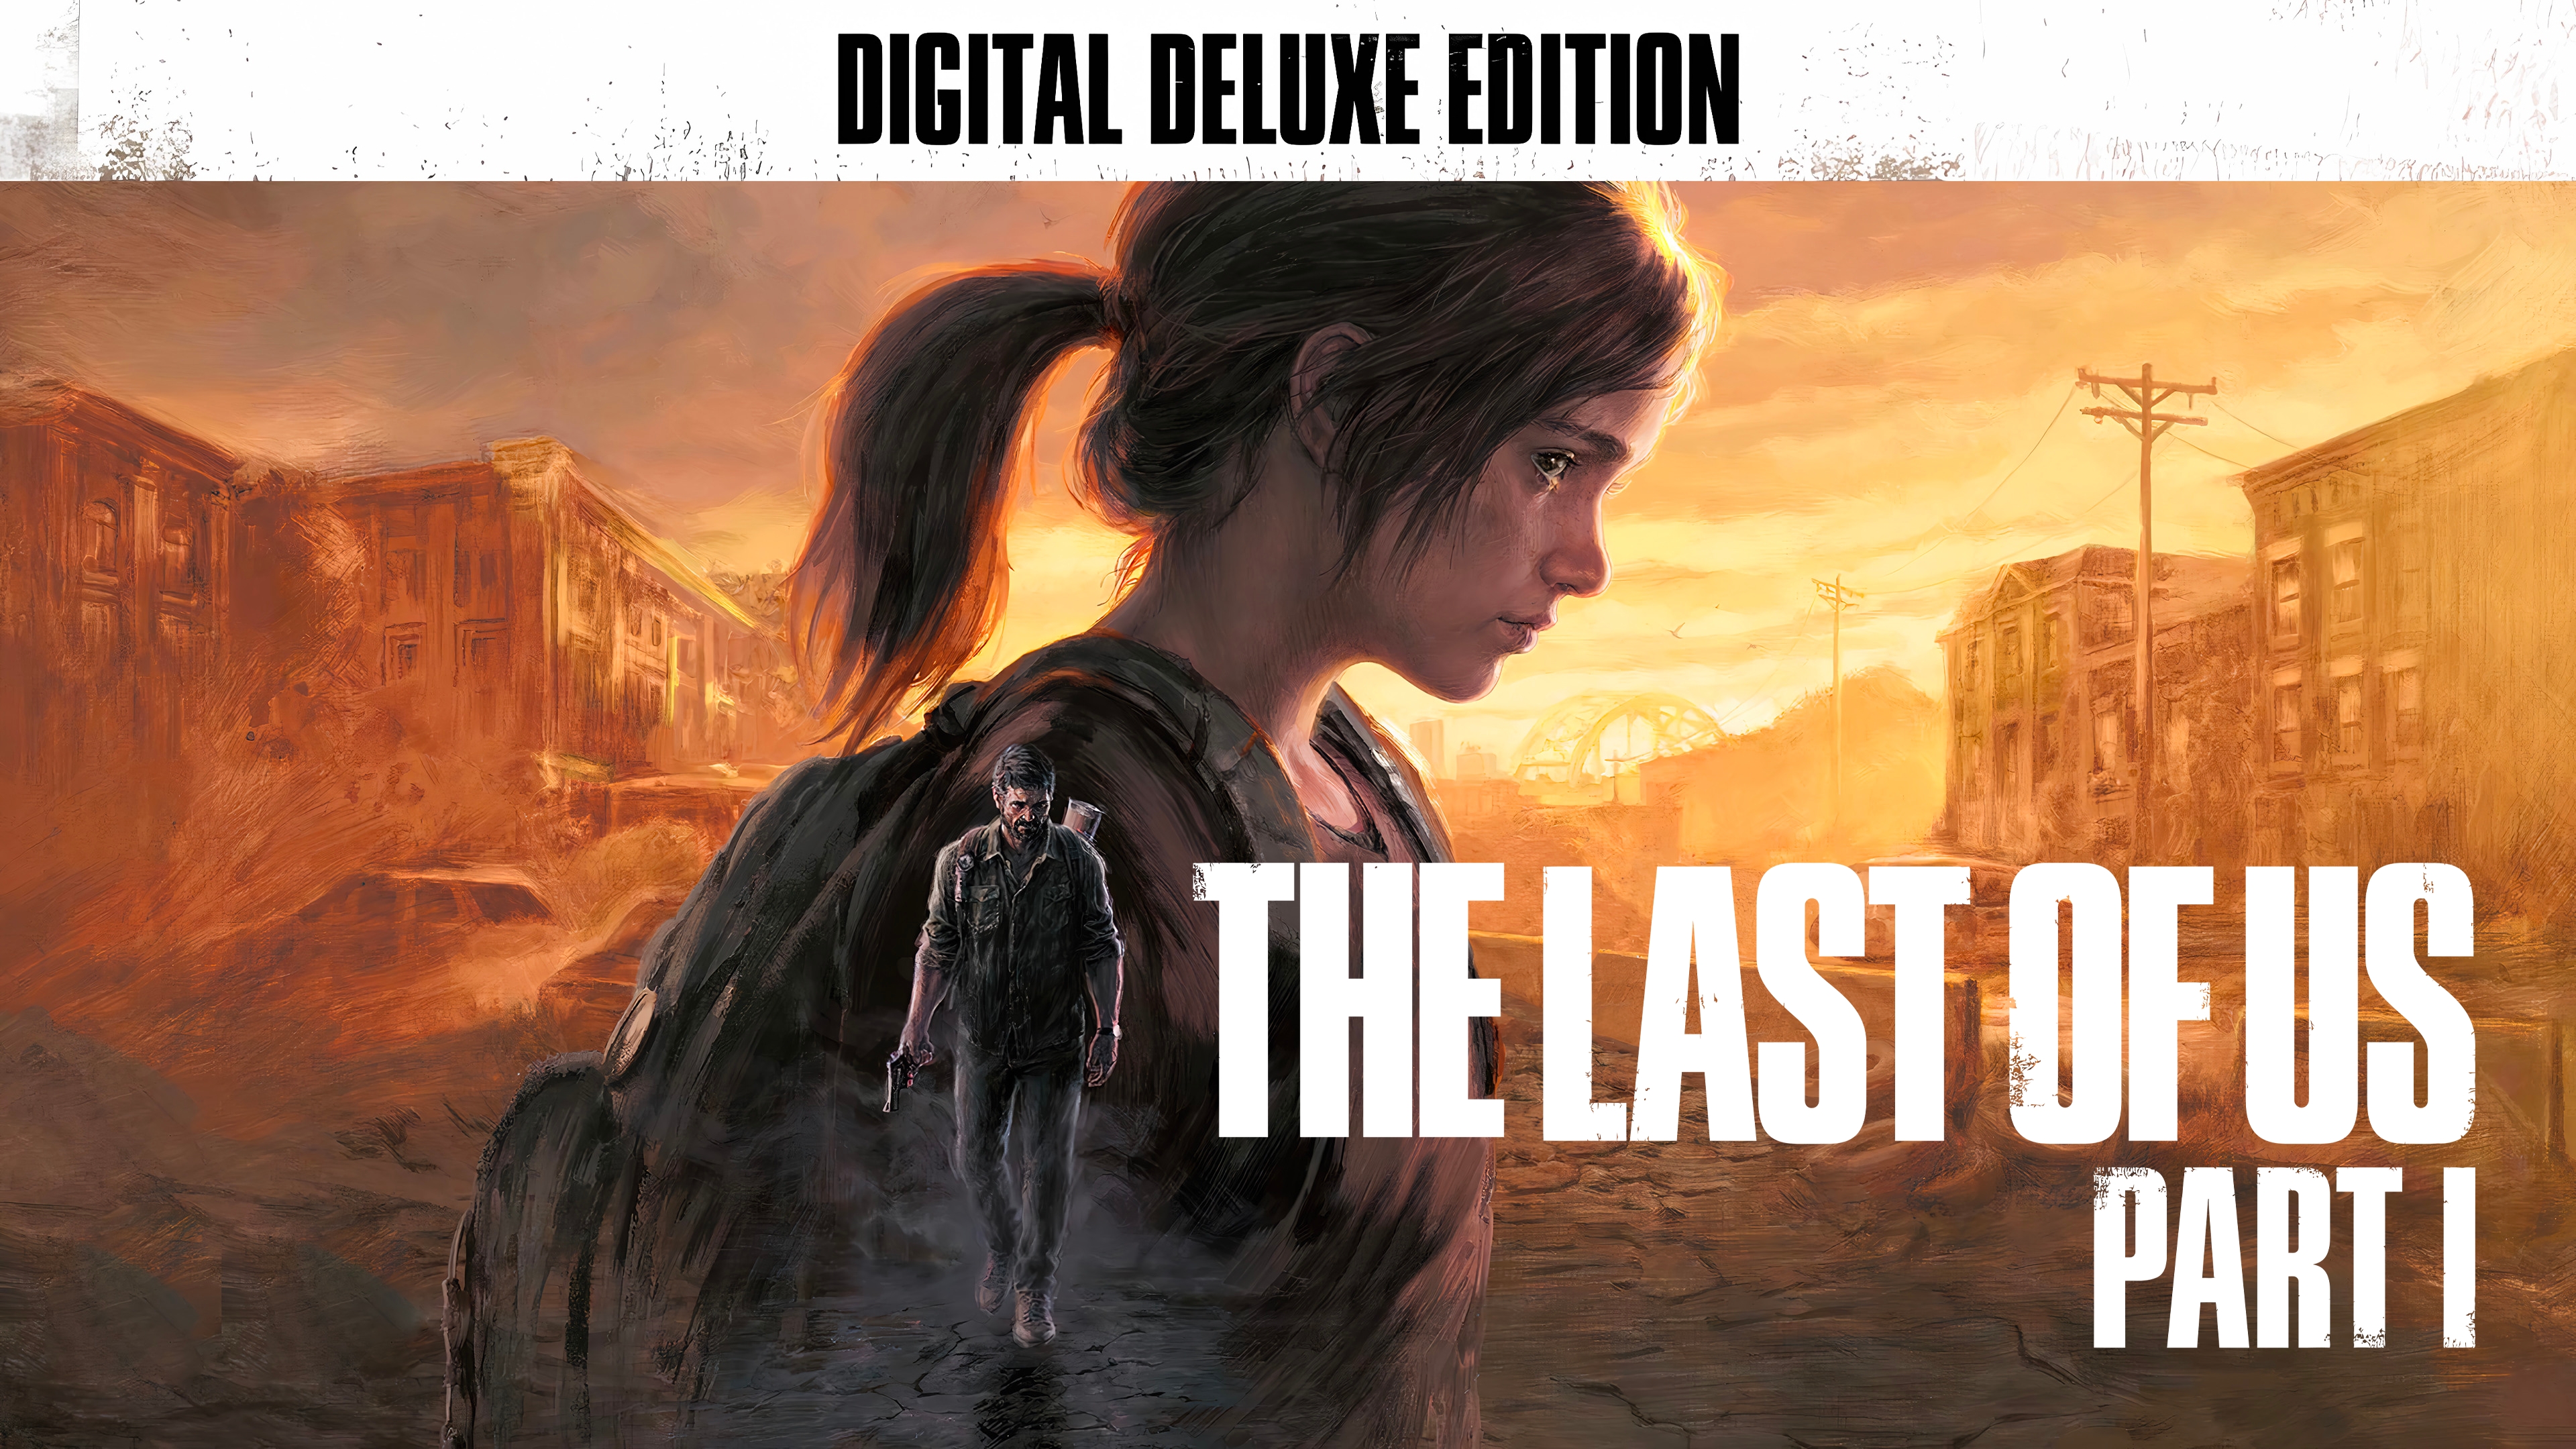 PS4 The Last of Us Part II  Sony Store Colombia - Sony Store Colombia